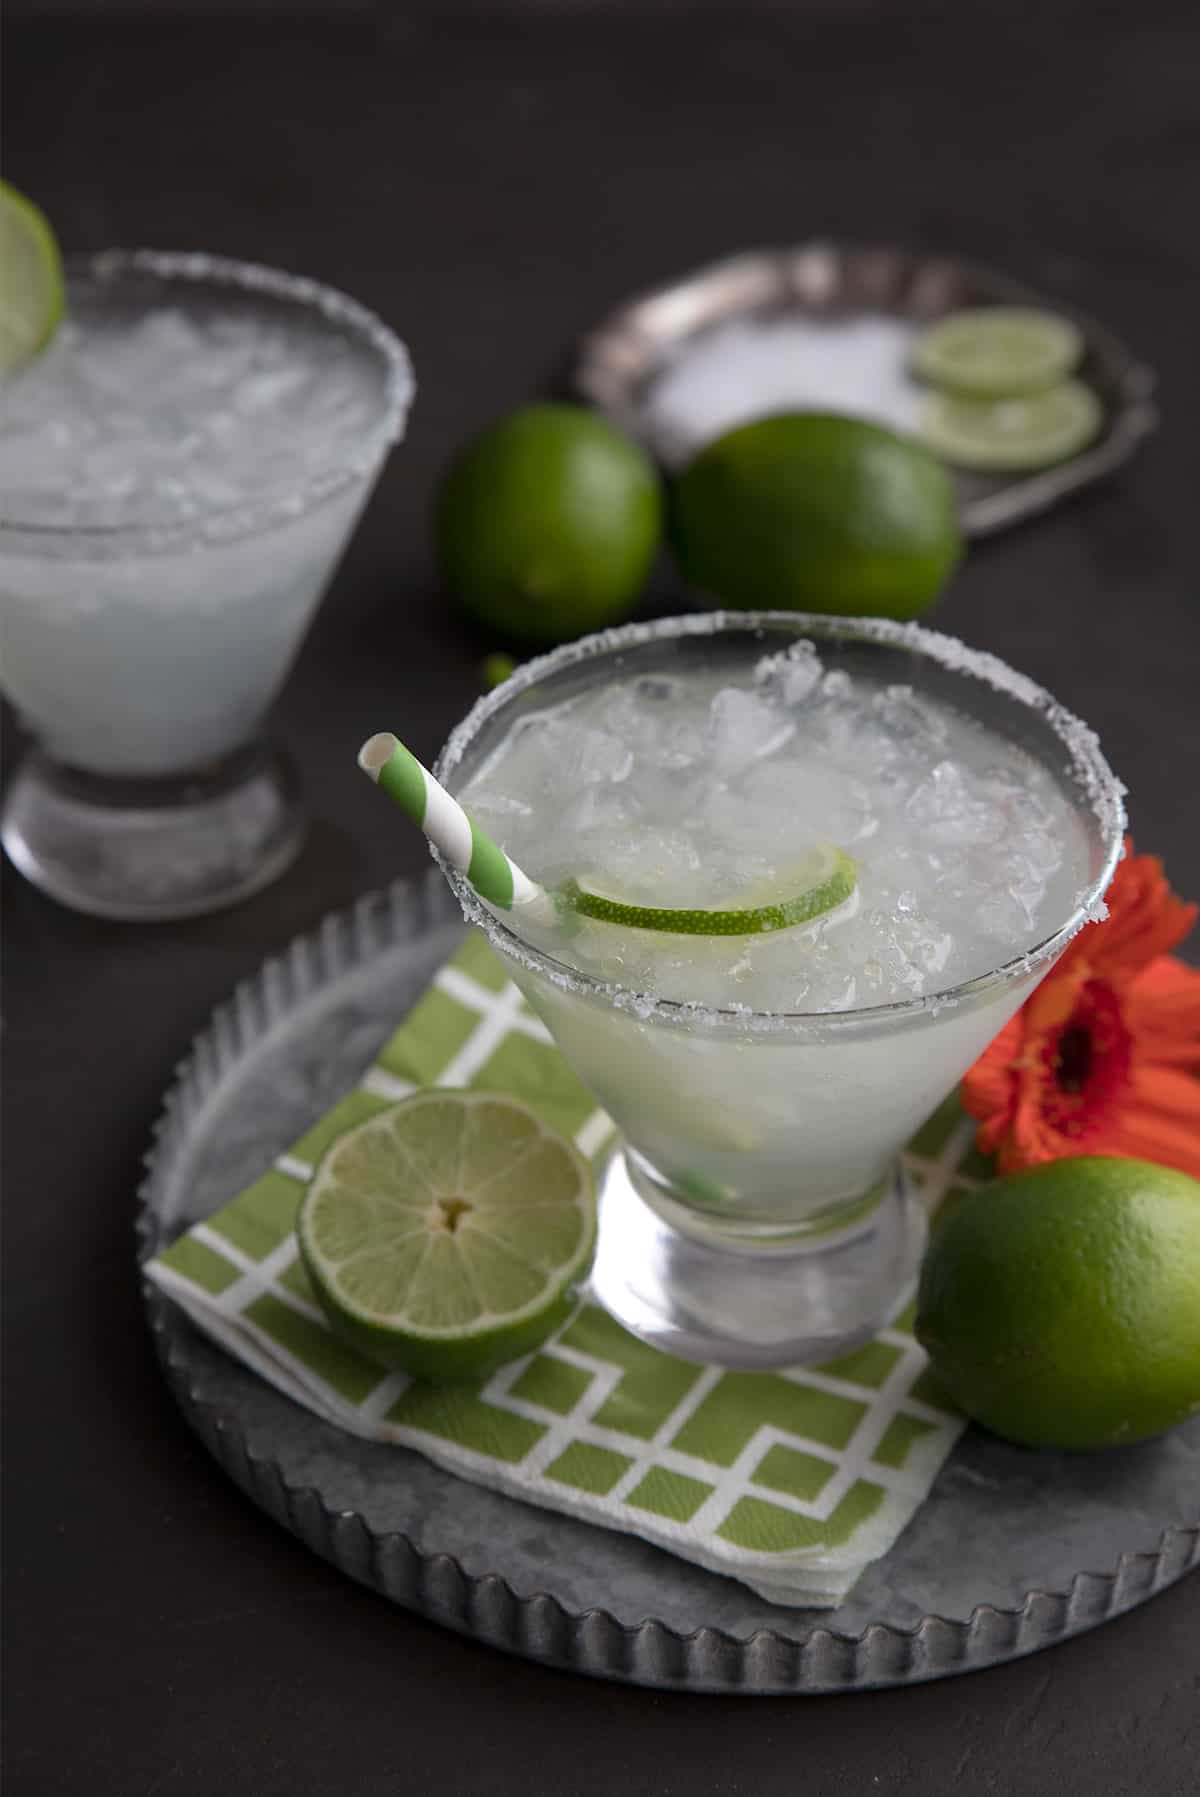 Two keto margaritas in cocktail glasses on a pewter tray, with sliced limes and a dish of salt.